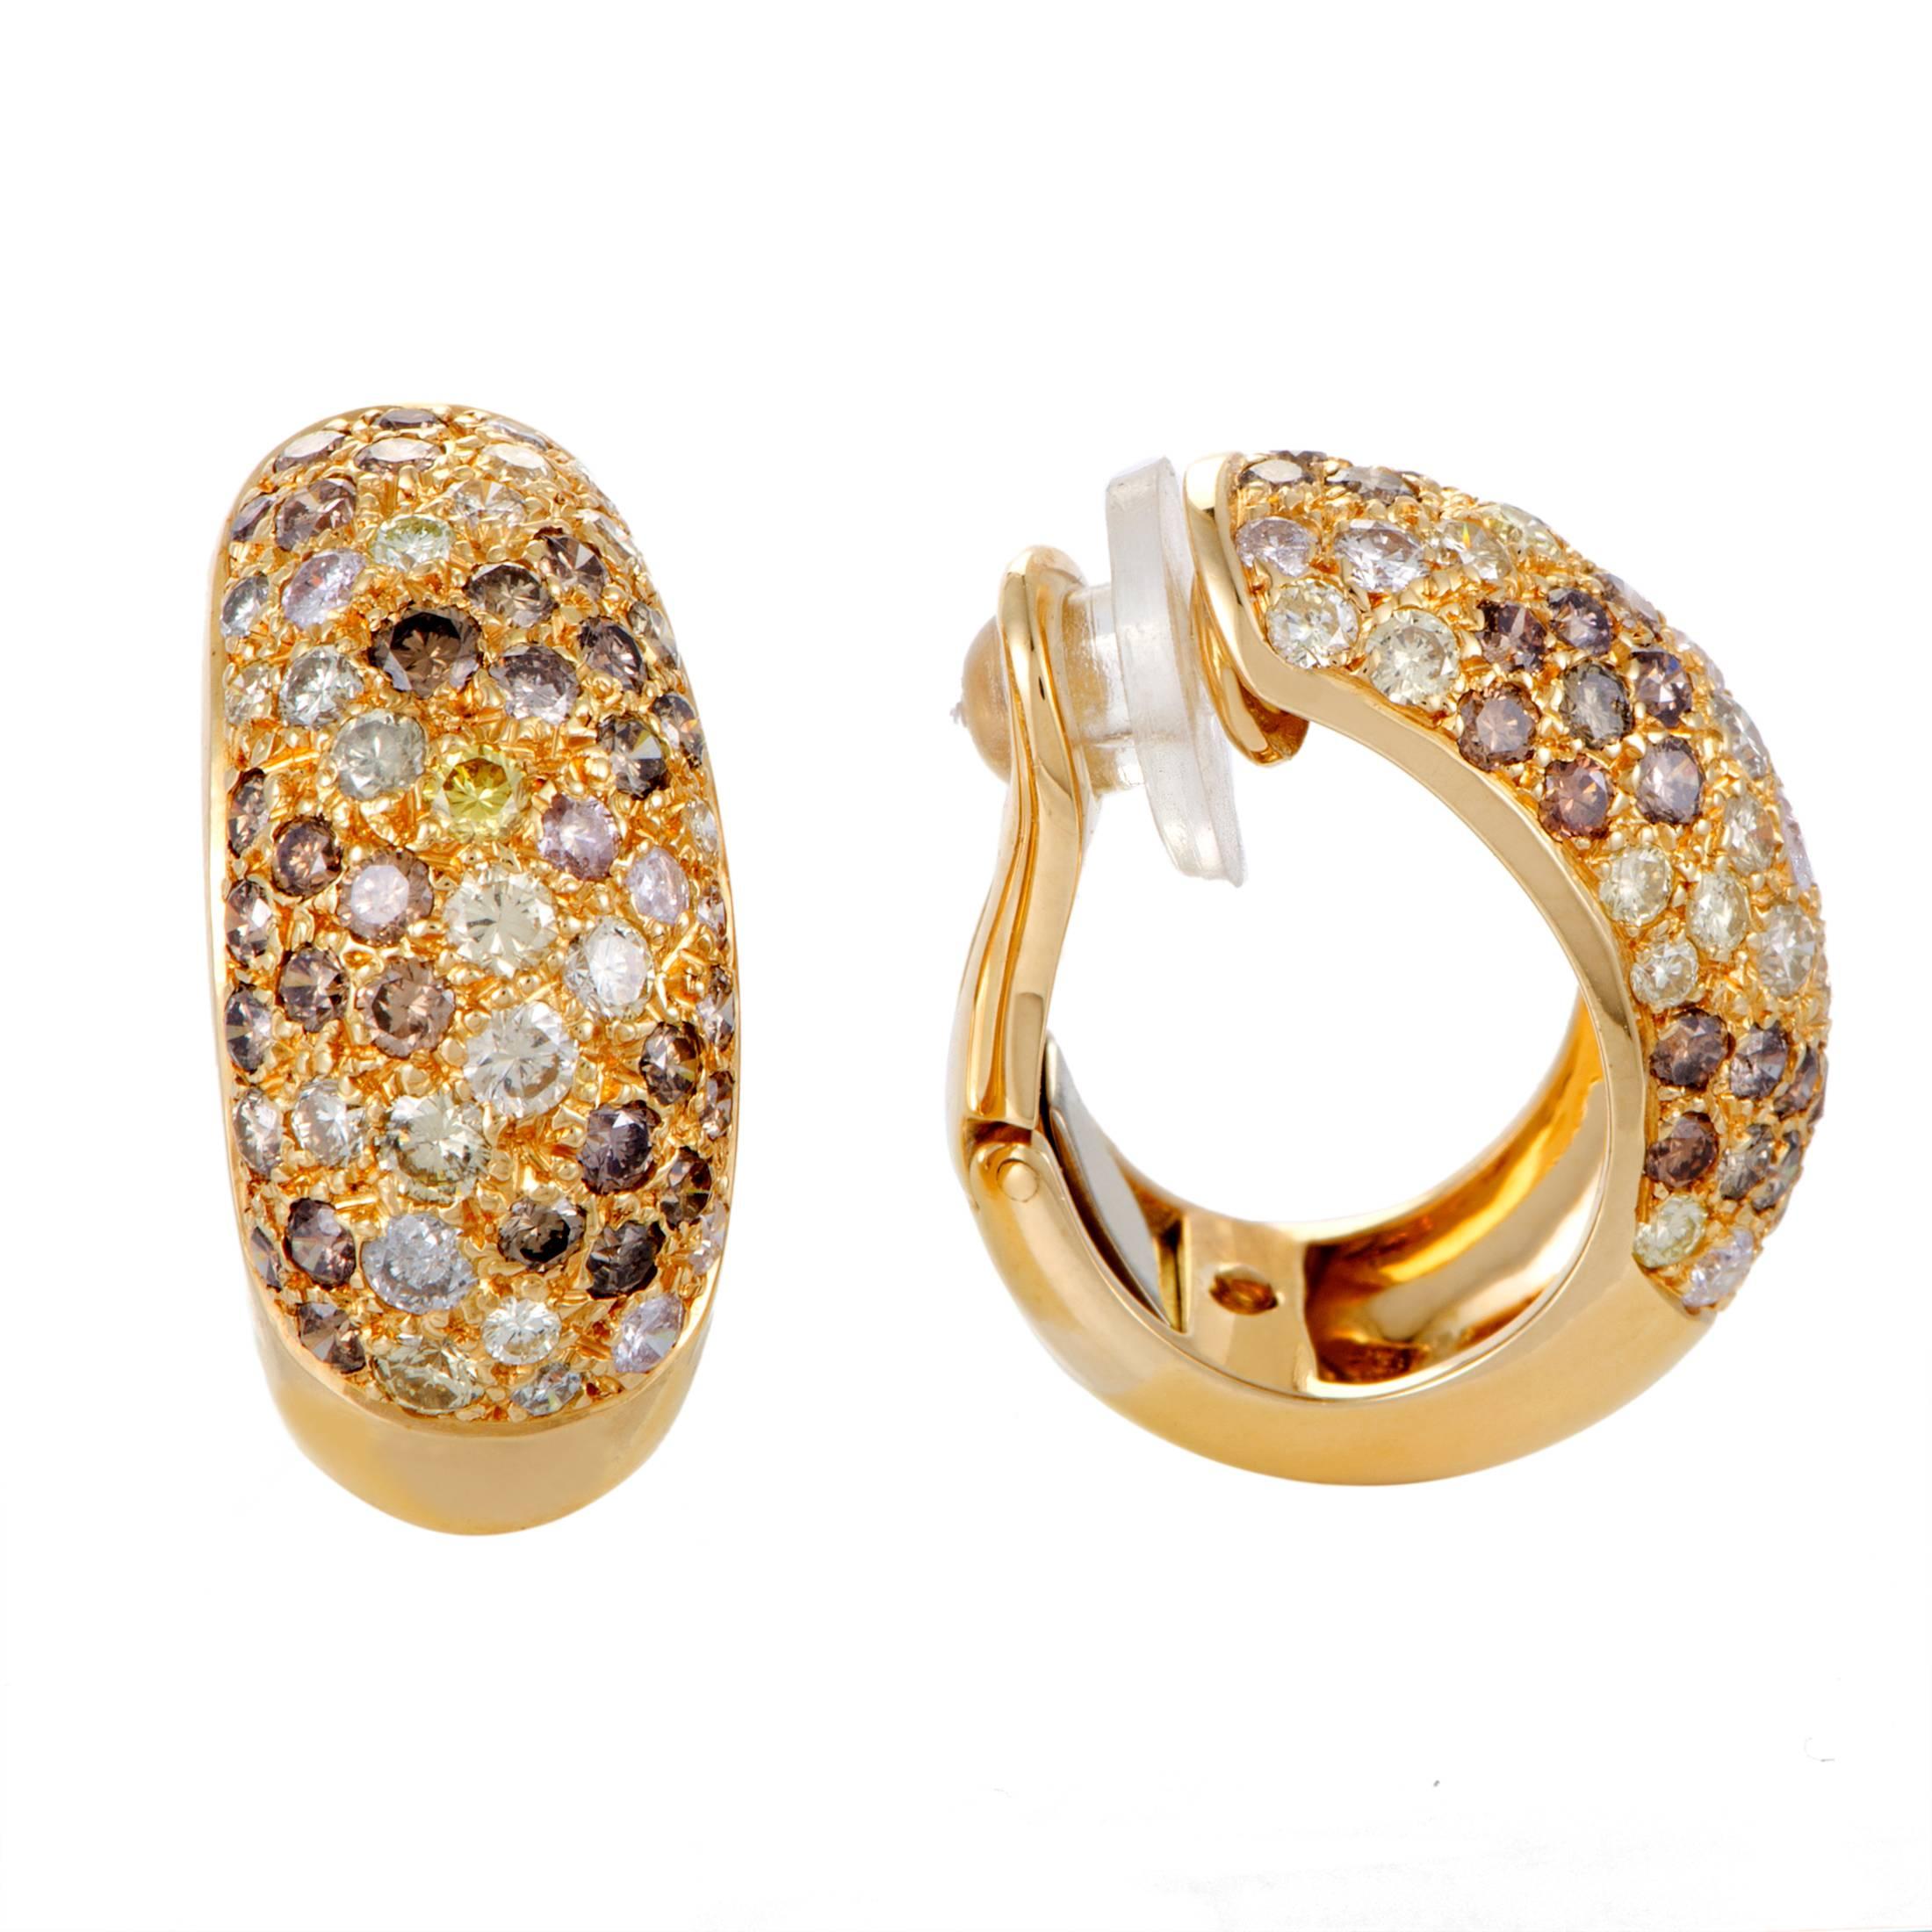 Fascinating multicolored diamonds are arranged to produce a scintillating sight in these fabulous 18K yellow gold earrings from Cartier which catch your eye with their dazzling effect produced by the gold radiance and diamond brilliance.
Included